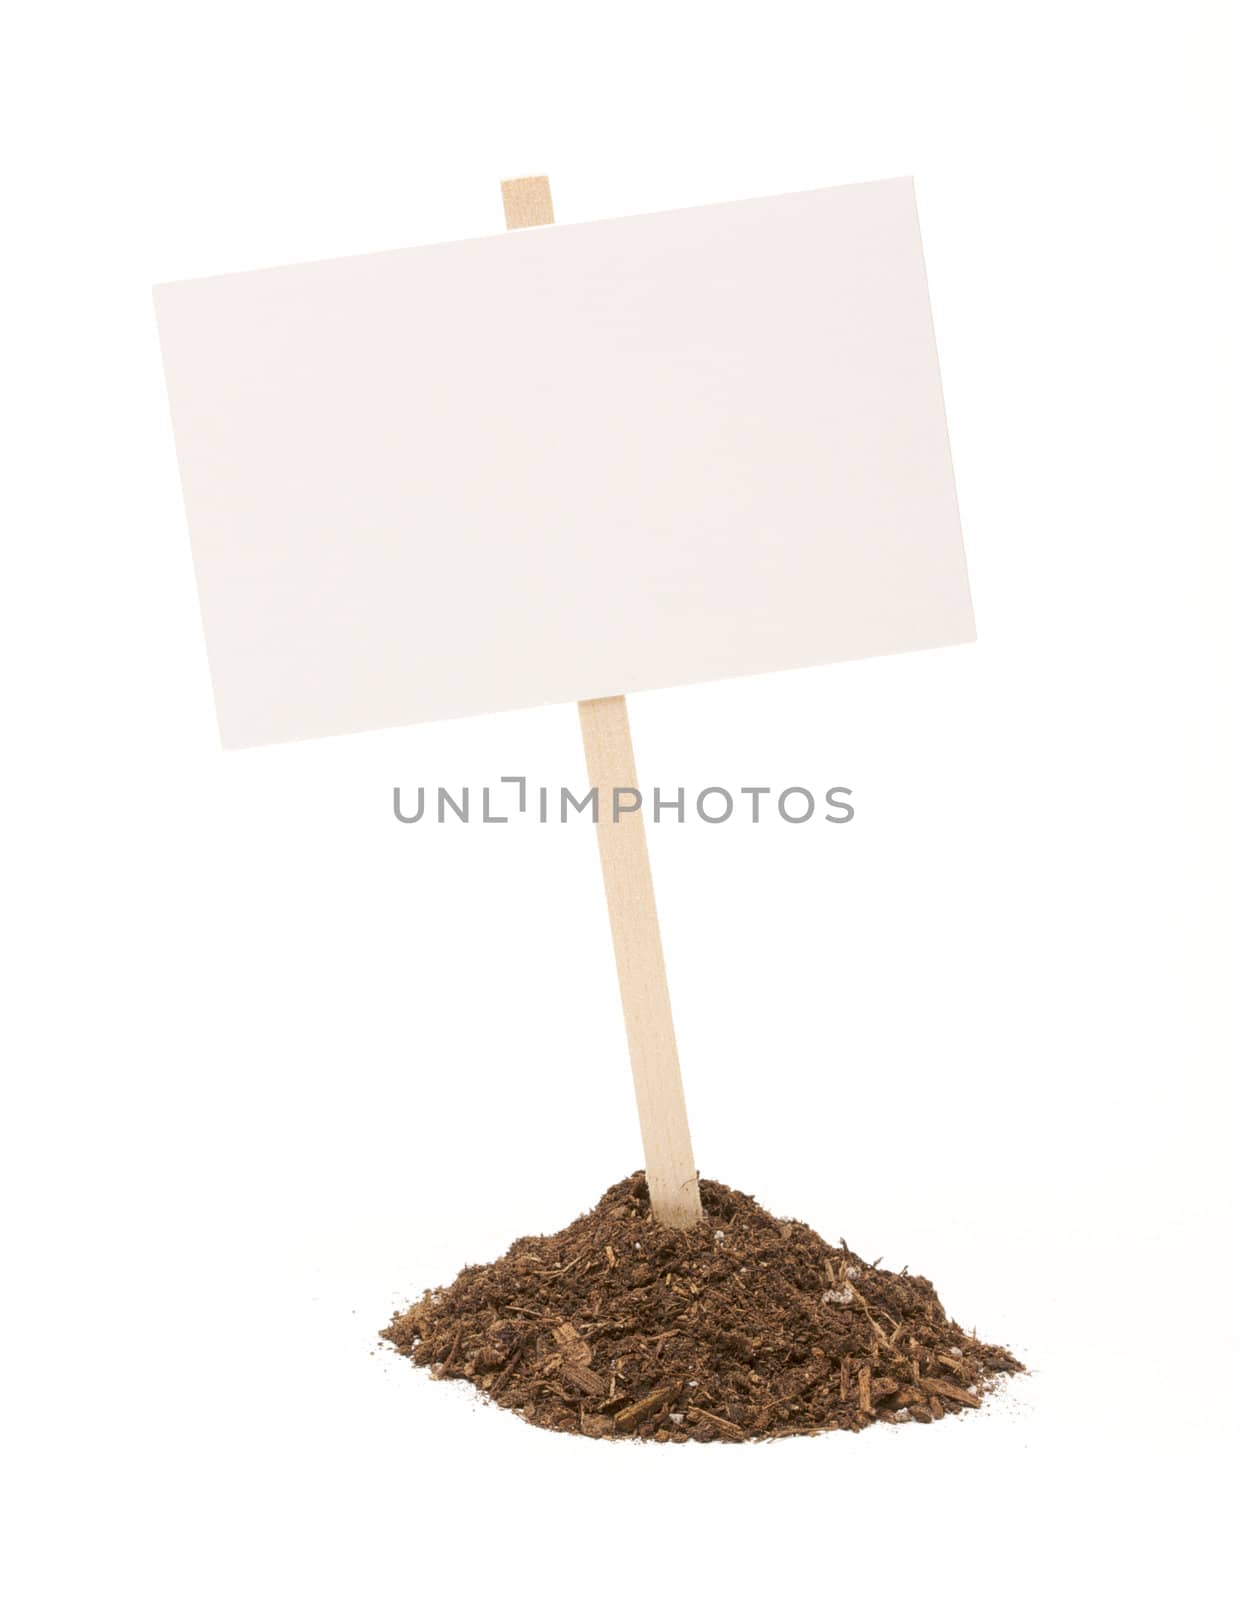 Blank white sign in mount of dirt isolated on a white background.